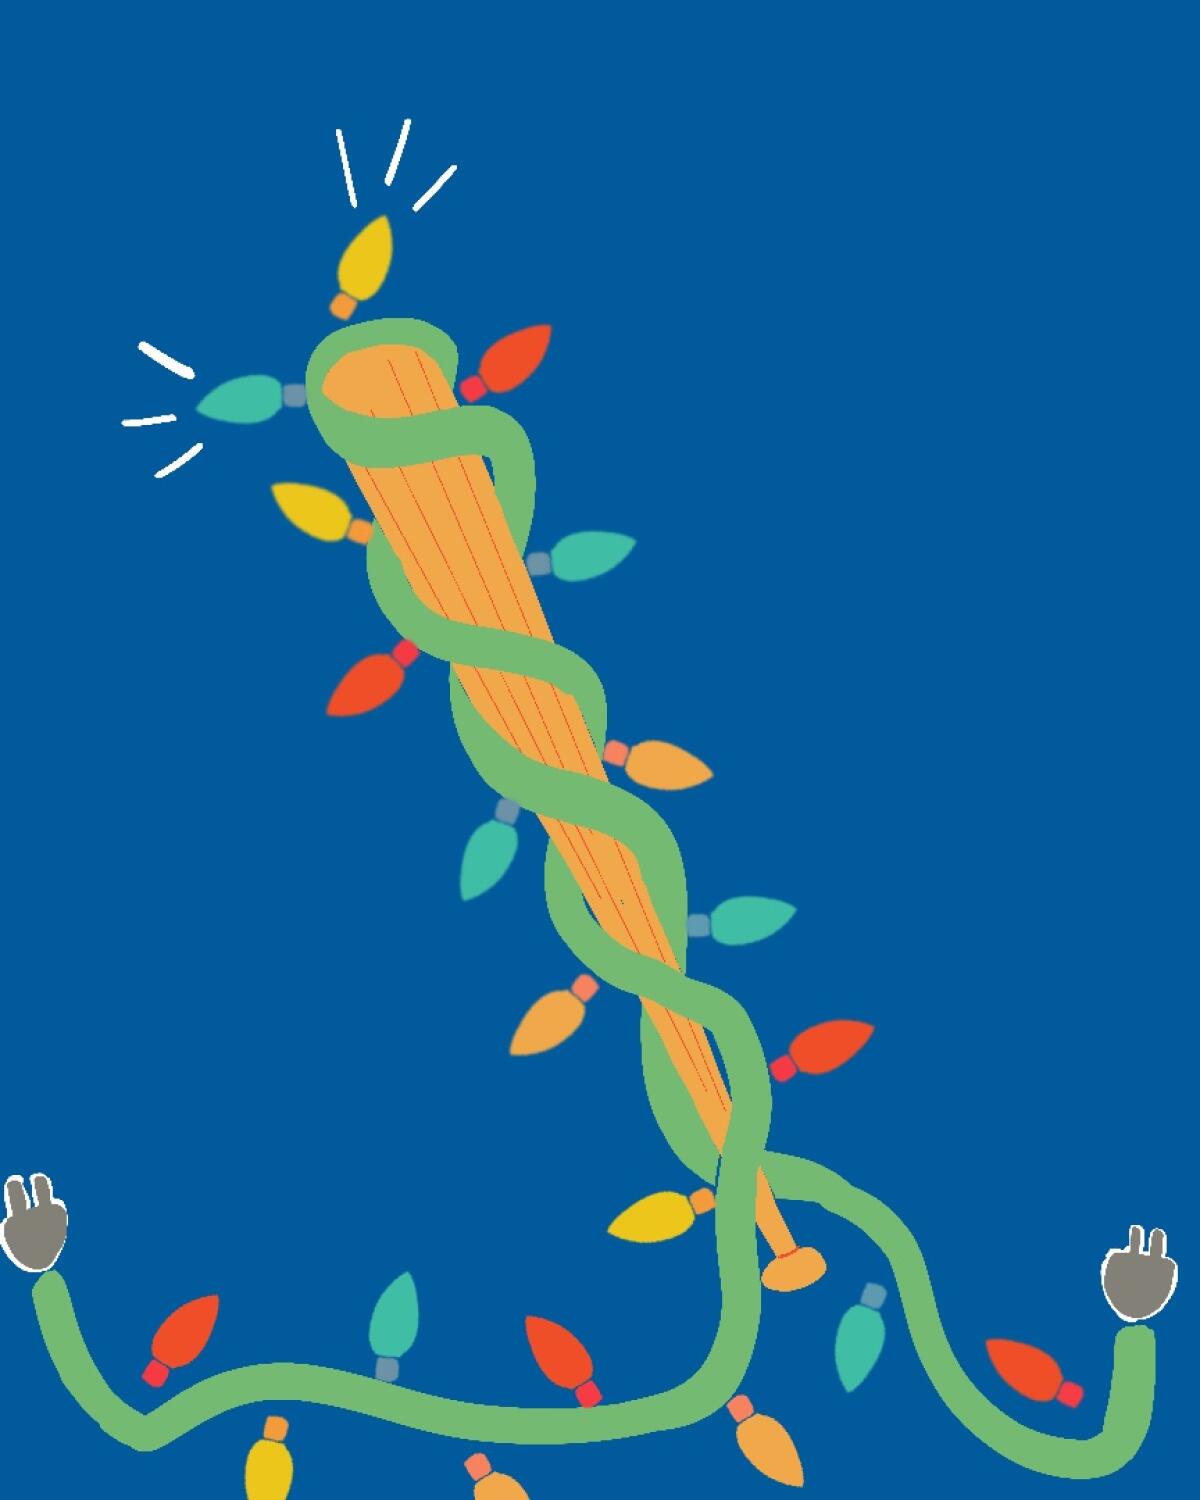 Illustration of a baseball bat wrapped in holiday lights.